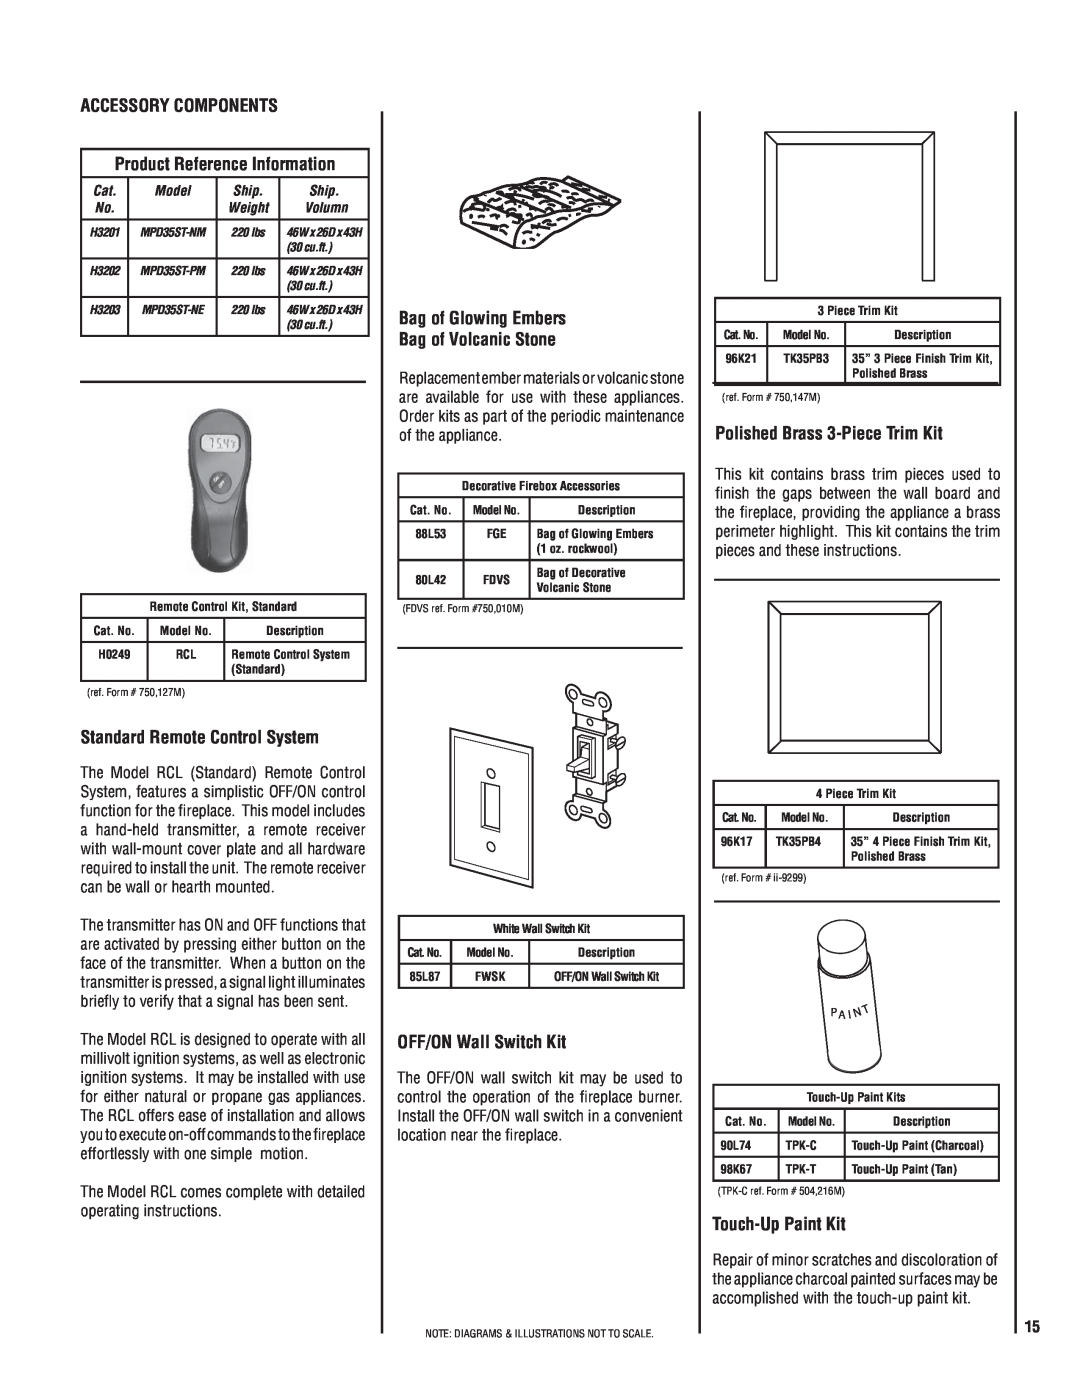 Lennox International Inc MPB35ST-NM Accessory Components, Product Reference Information, Standard Remote Control System 